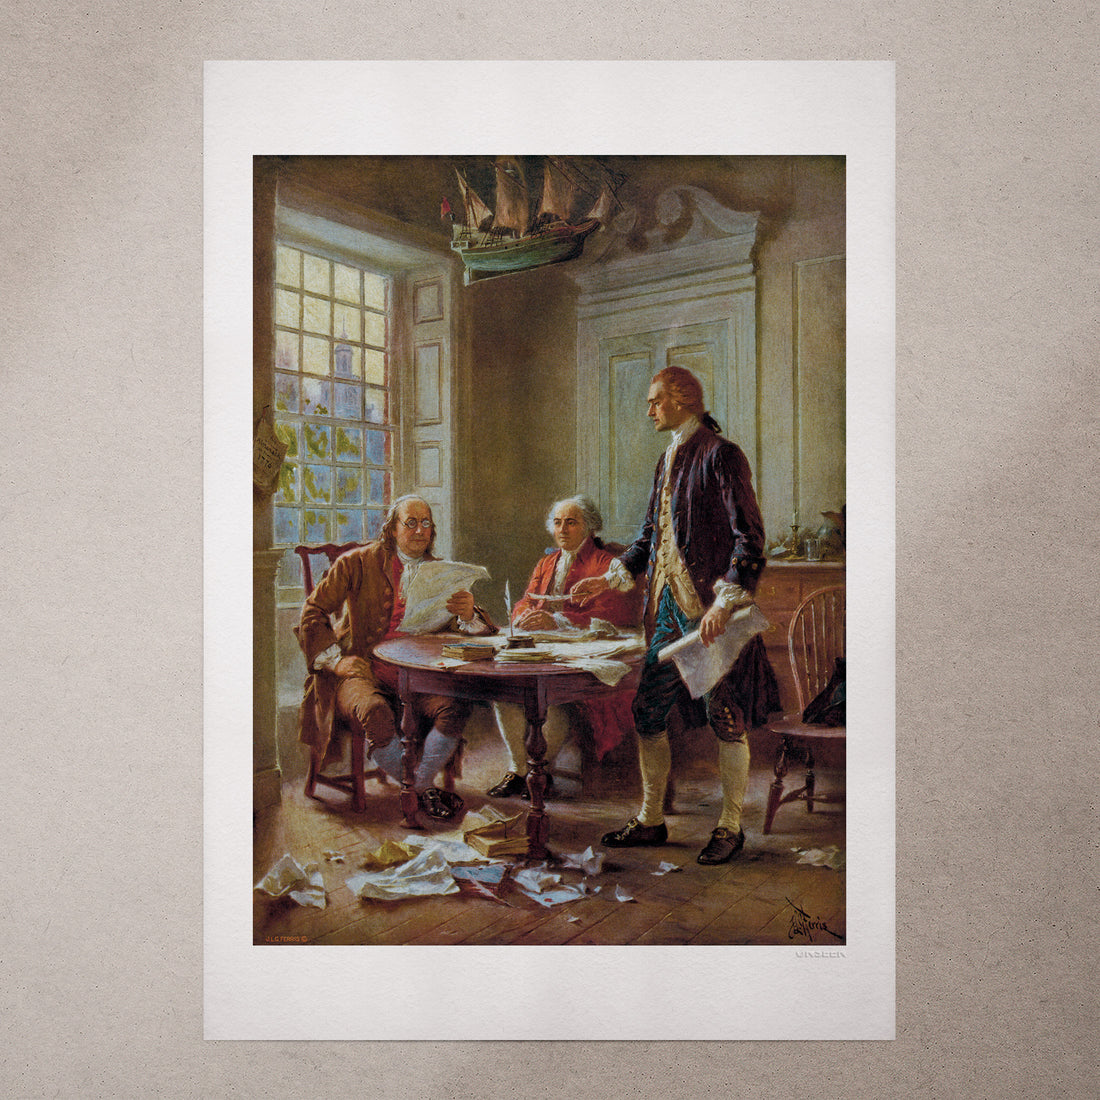 Writing the Declaration of Independence, 1776 by Jean Leon Gerome Ferris, 1932